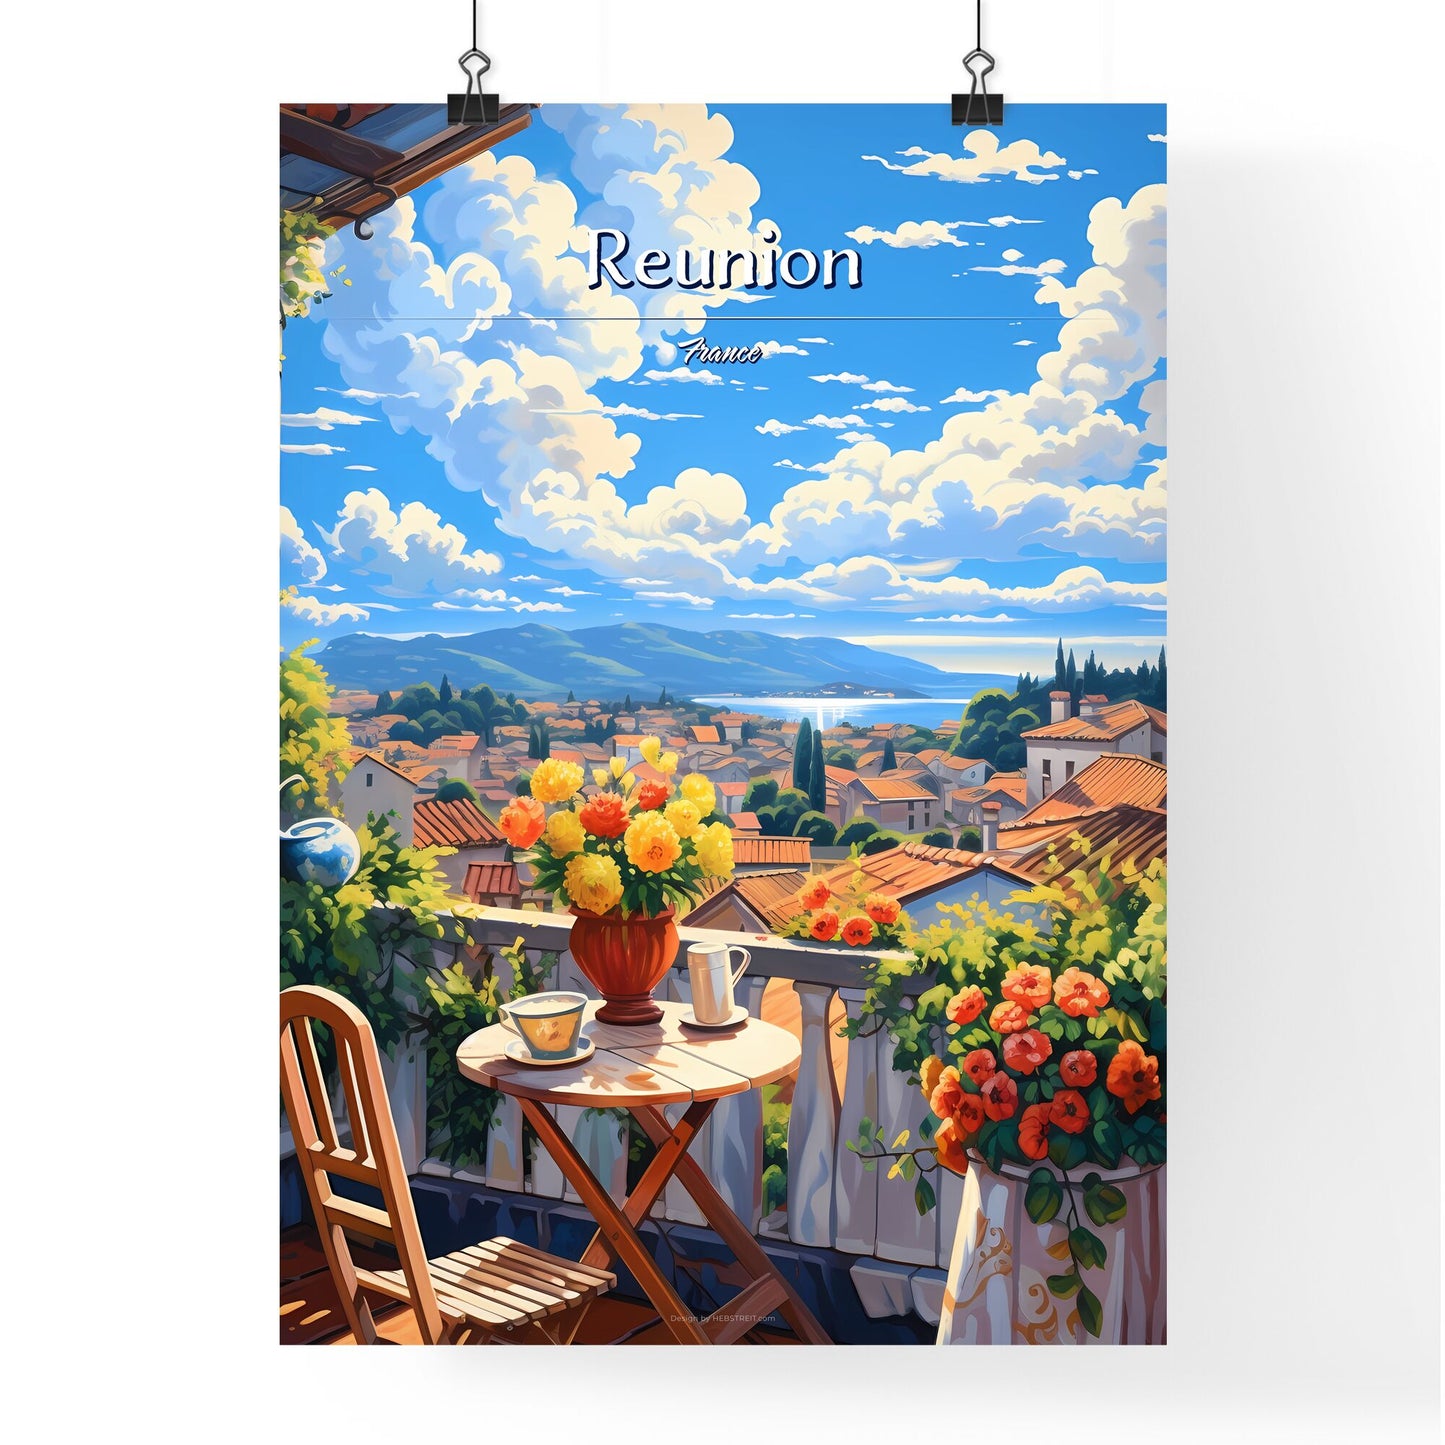 On the roofs of Reunion, France - Art print of a street with colorful buildings and cars Default Title